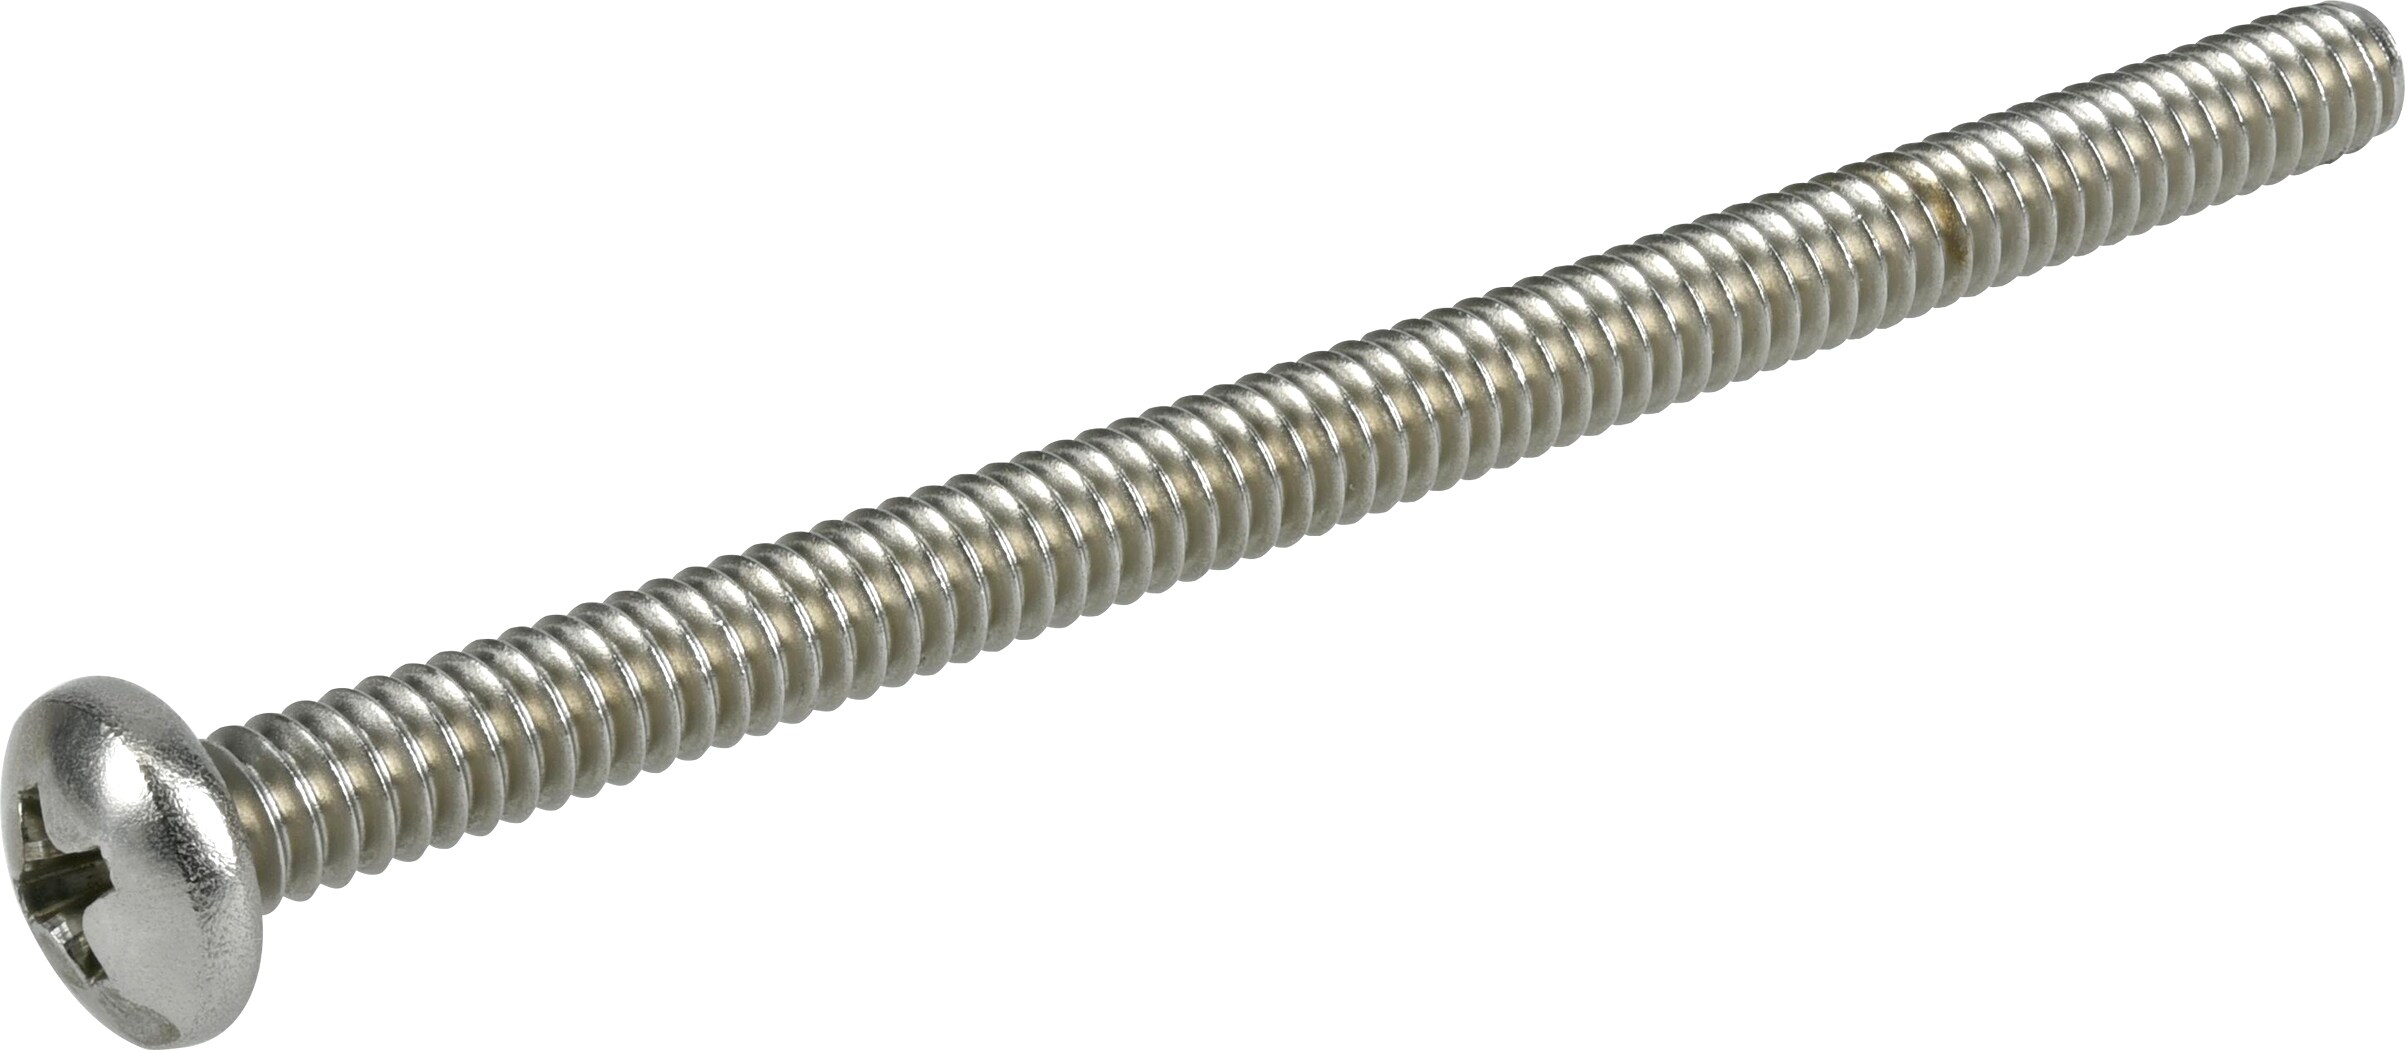 10-24x3-1/2 Stainless Phillips Pan Screws Bolts #10-24x3-1/2 #10x24x3.5 5 